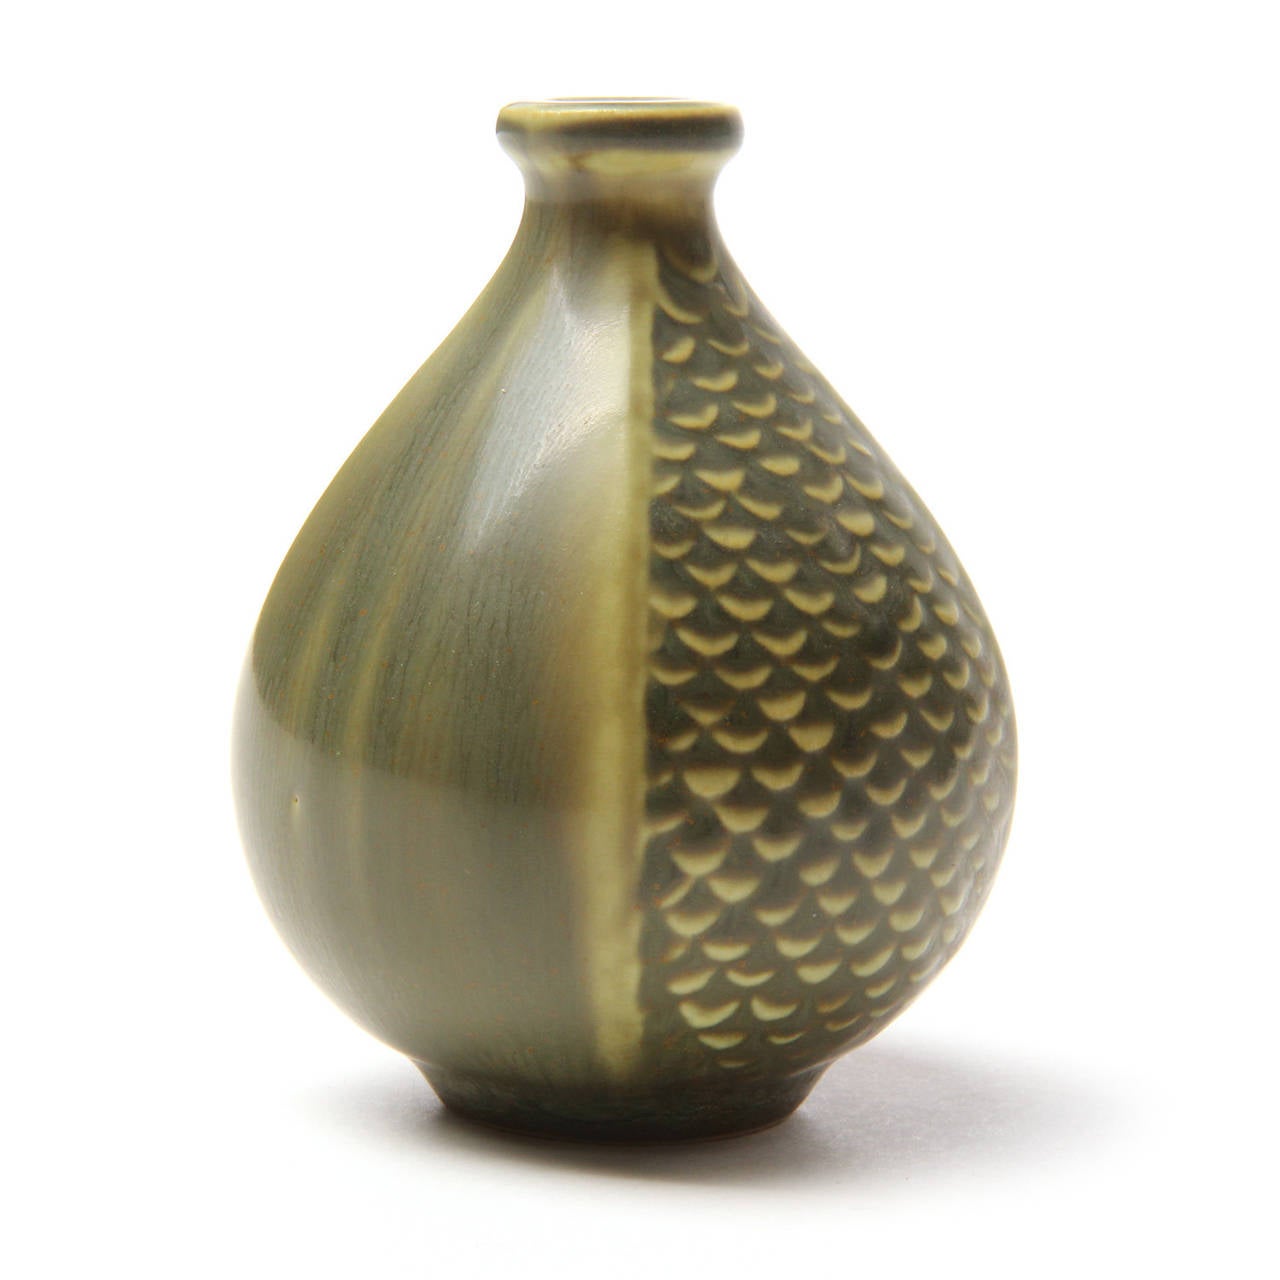 A diminutive four sided teardrop ceramic vase with alternating plain / scaled sides and covered in a matte olive hare's fur glaze. Designed by Wilhelm Kage, crafted by Gustavsberg Studio in Sweden, circa 1950s.